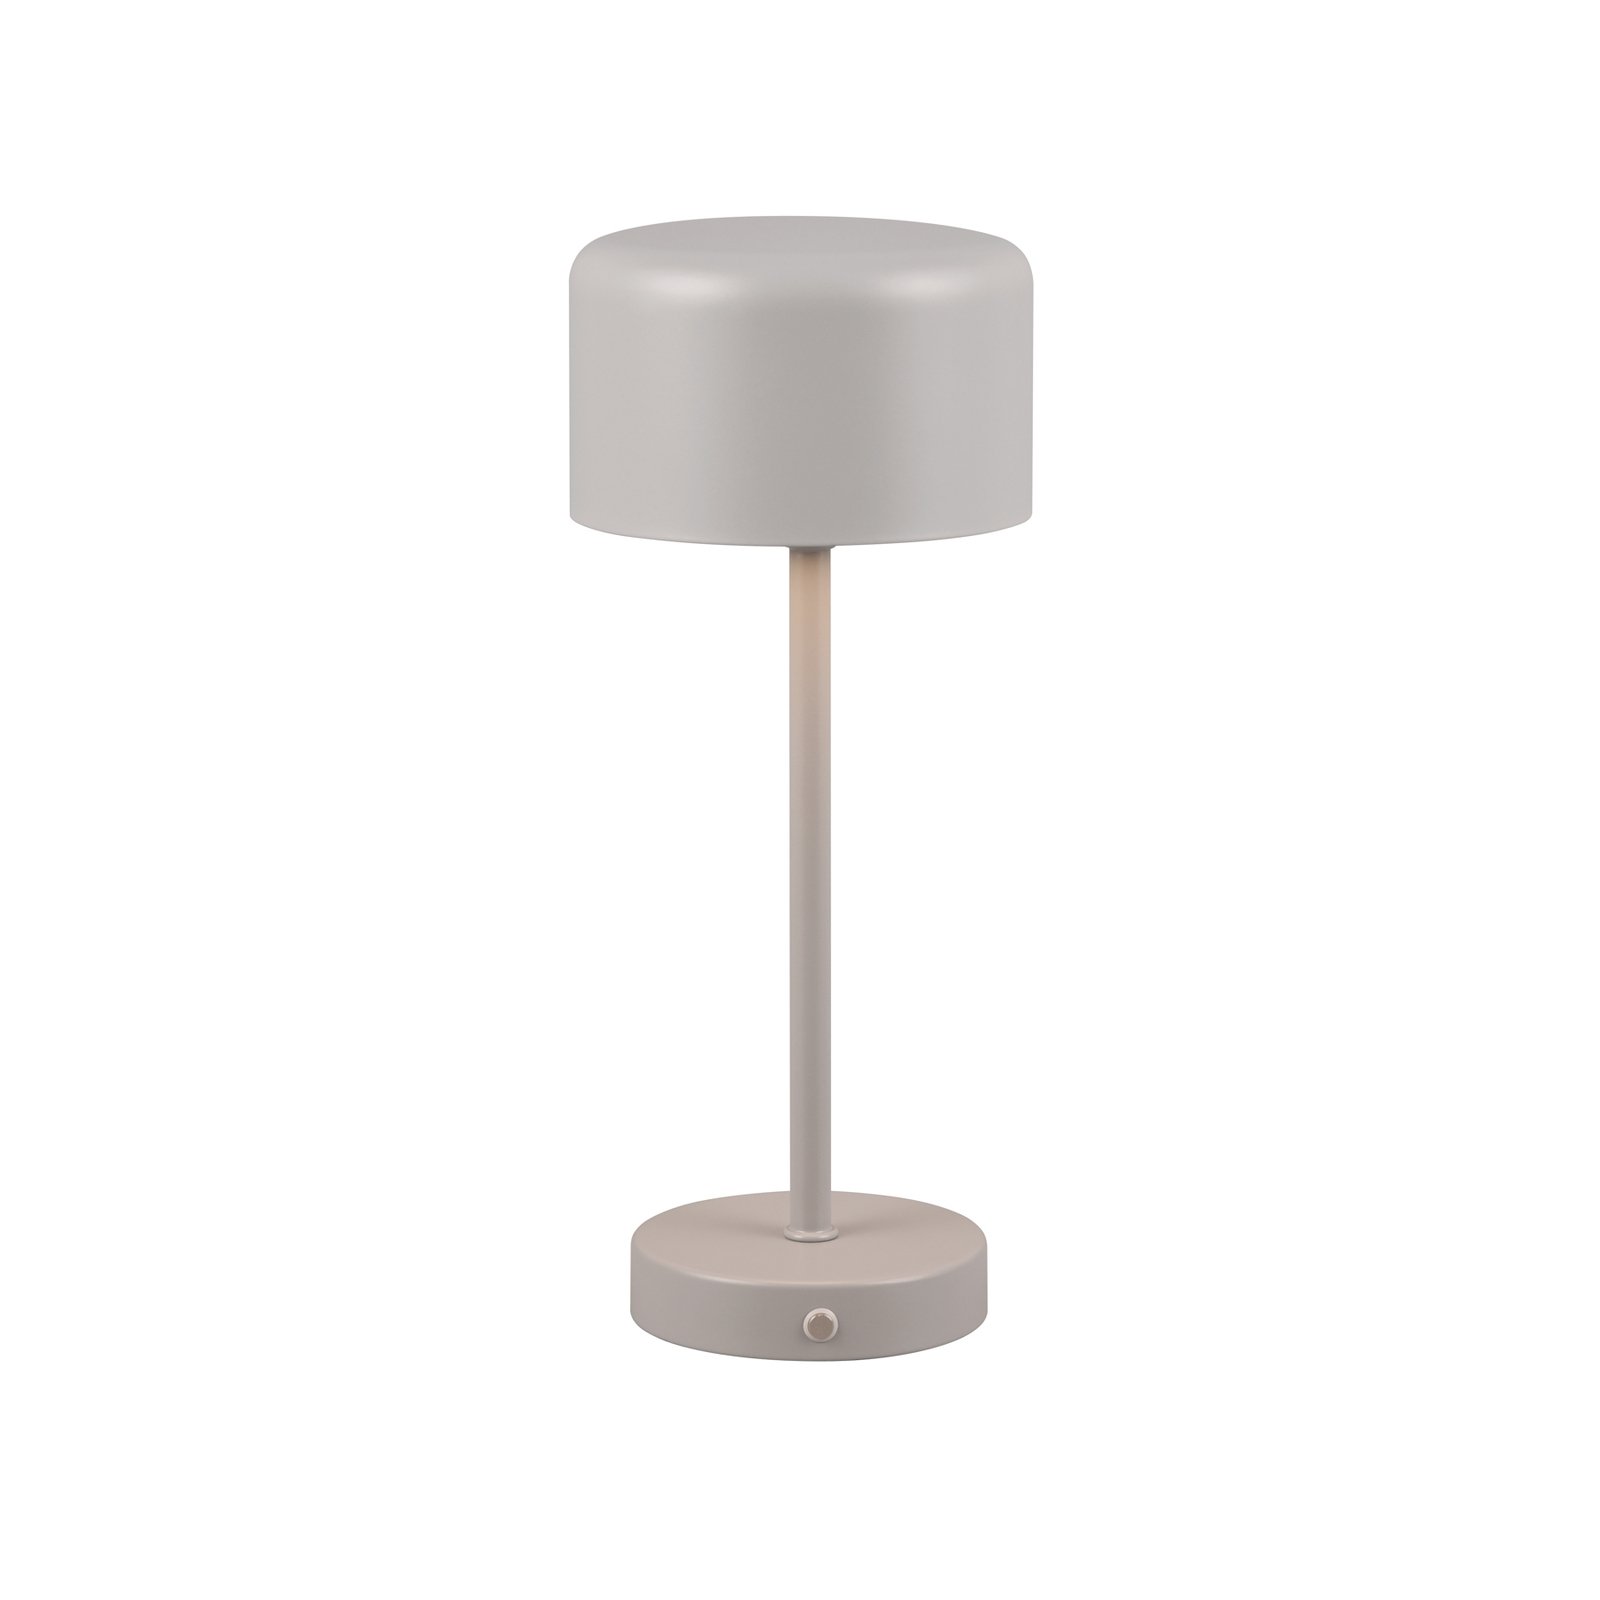 Jeff LED table lamp with a battery ultimate grey